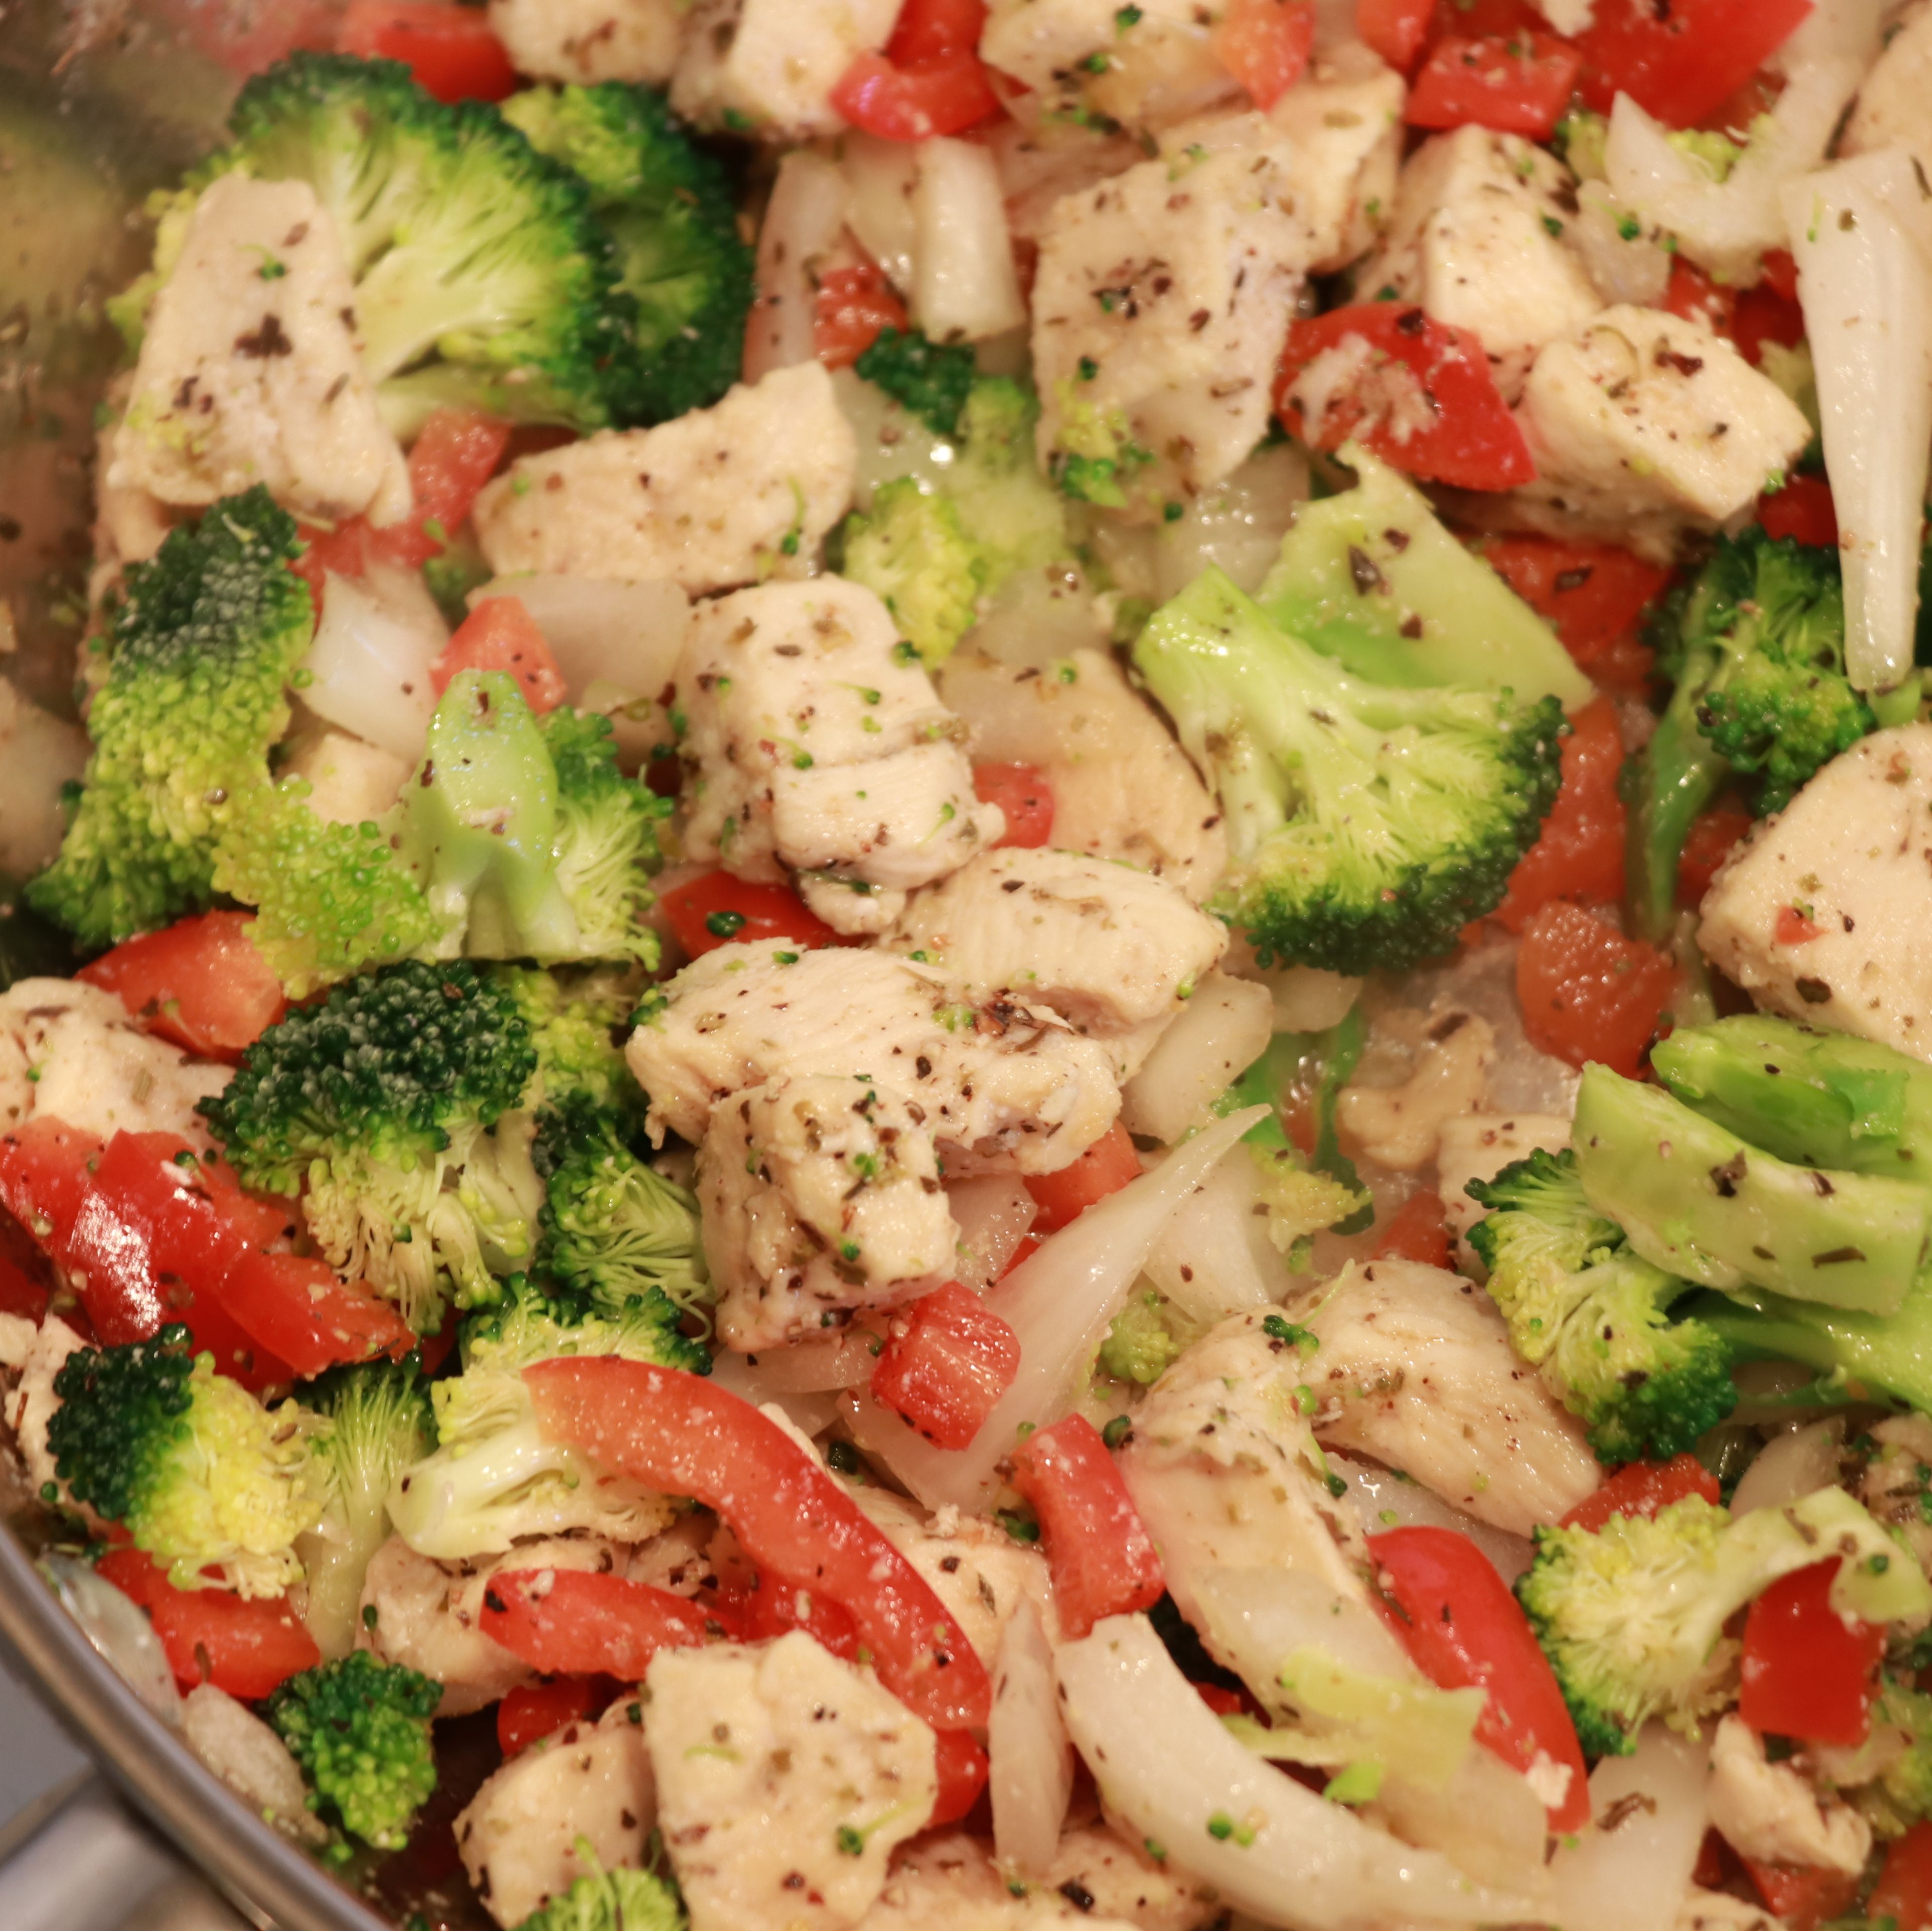 Add in red pepper, broccoli and onion to the pan with the chicken and cook another 3-4 minutes.